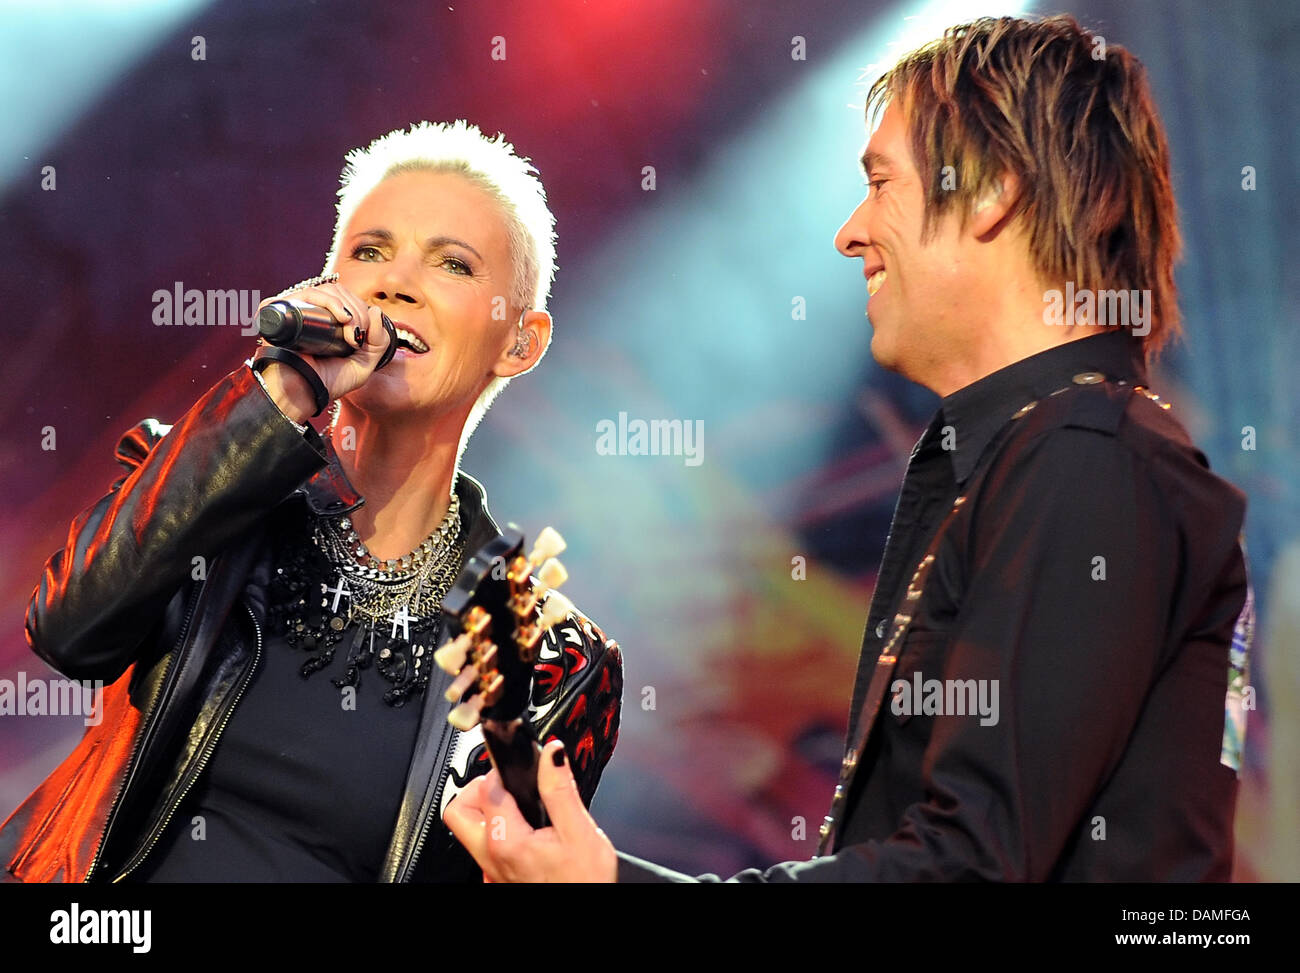 The Swedish pop duo Roxette with Per Gessle and Marie Fredriksson (L) performs on stage at the Citadel in Berlin, Germany, 11 June 2011. After starting the tour in Berlin Roxette is going to perform in 13 other German cities. Photo: Britta Pedersen Stock Photo